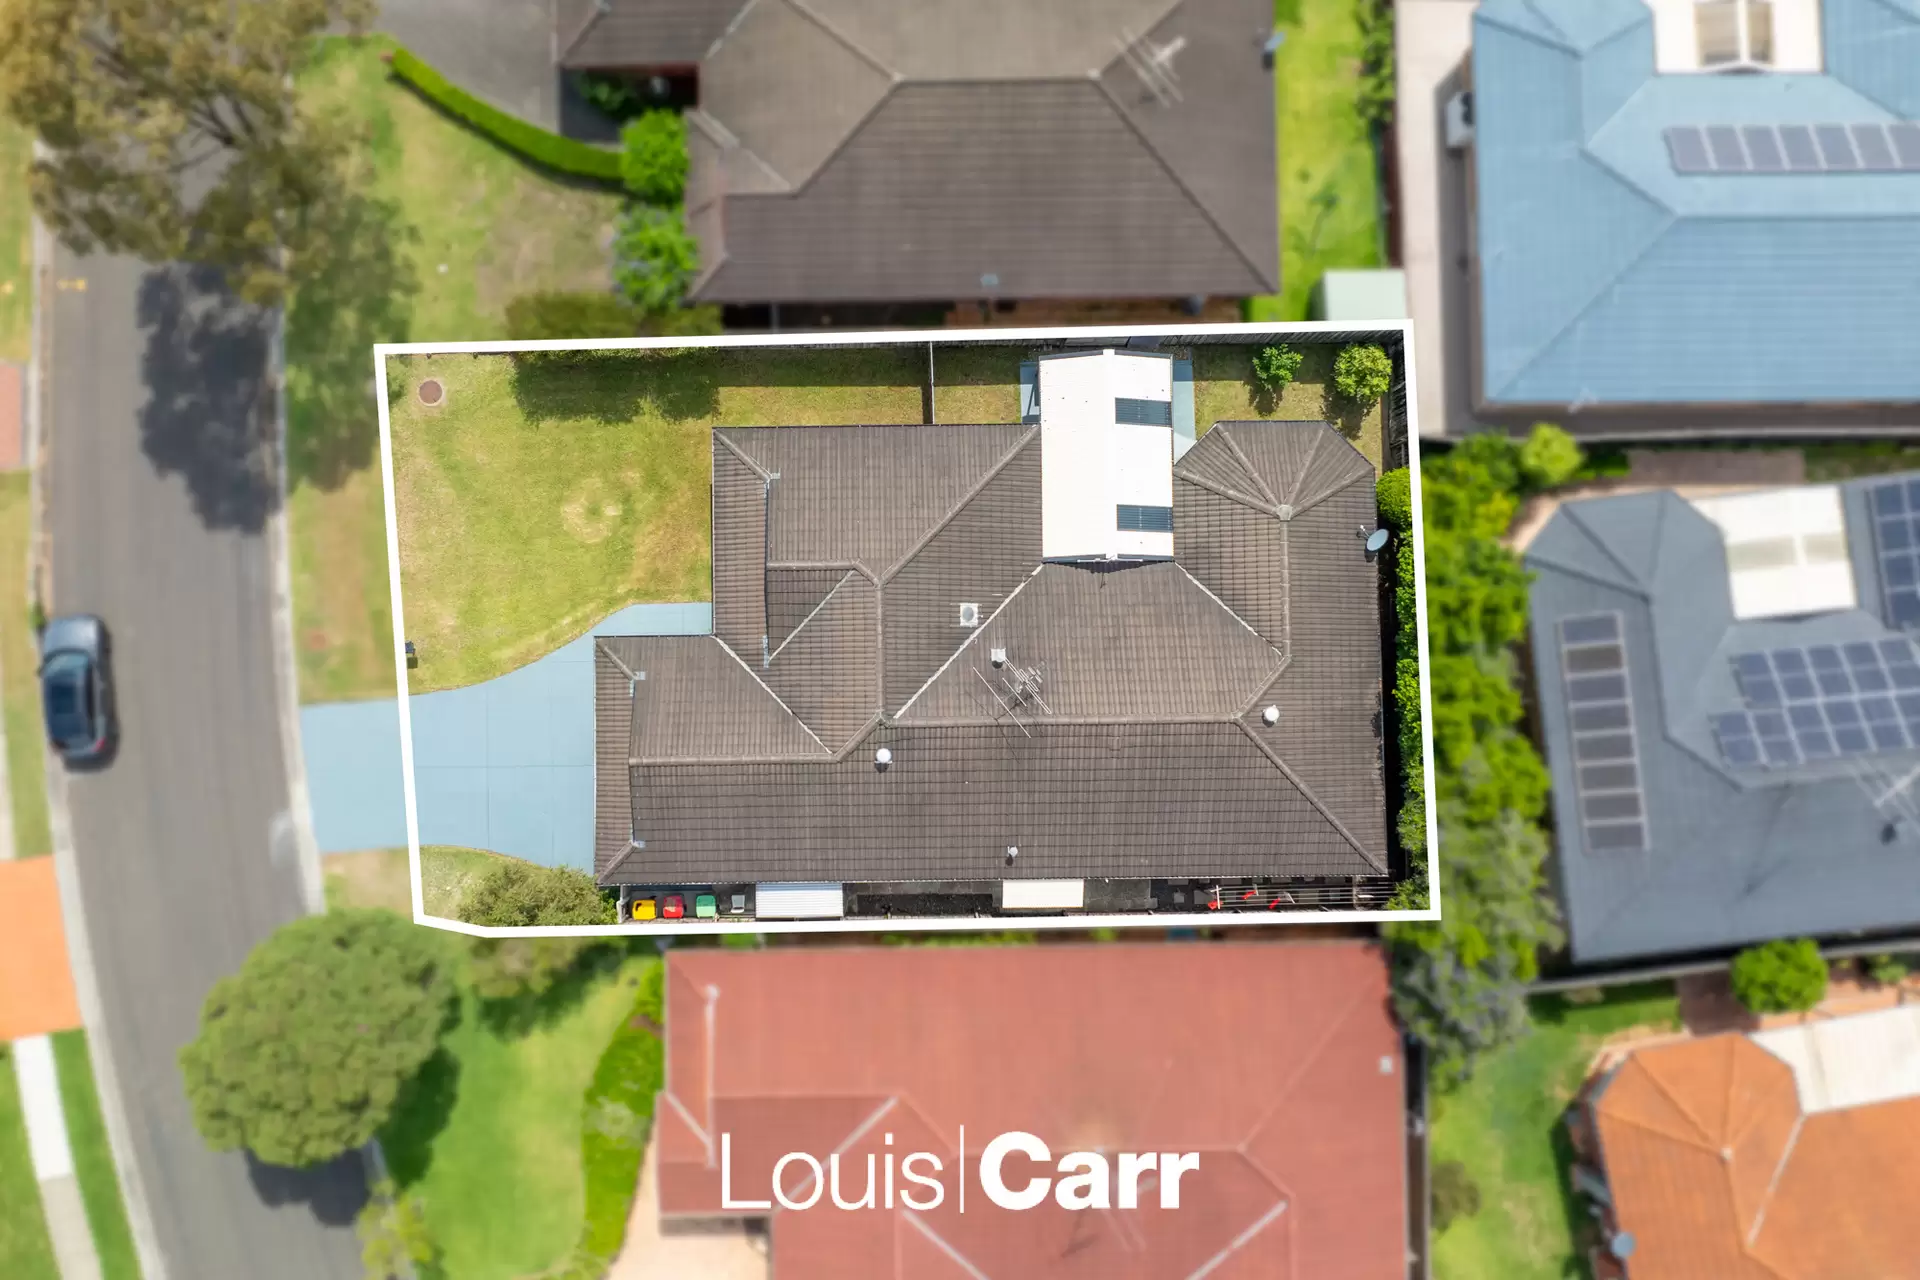 Photo #21: 33 Marsden Avenue, Kellyville - For Sale by Louis Carr Real Estate